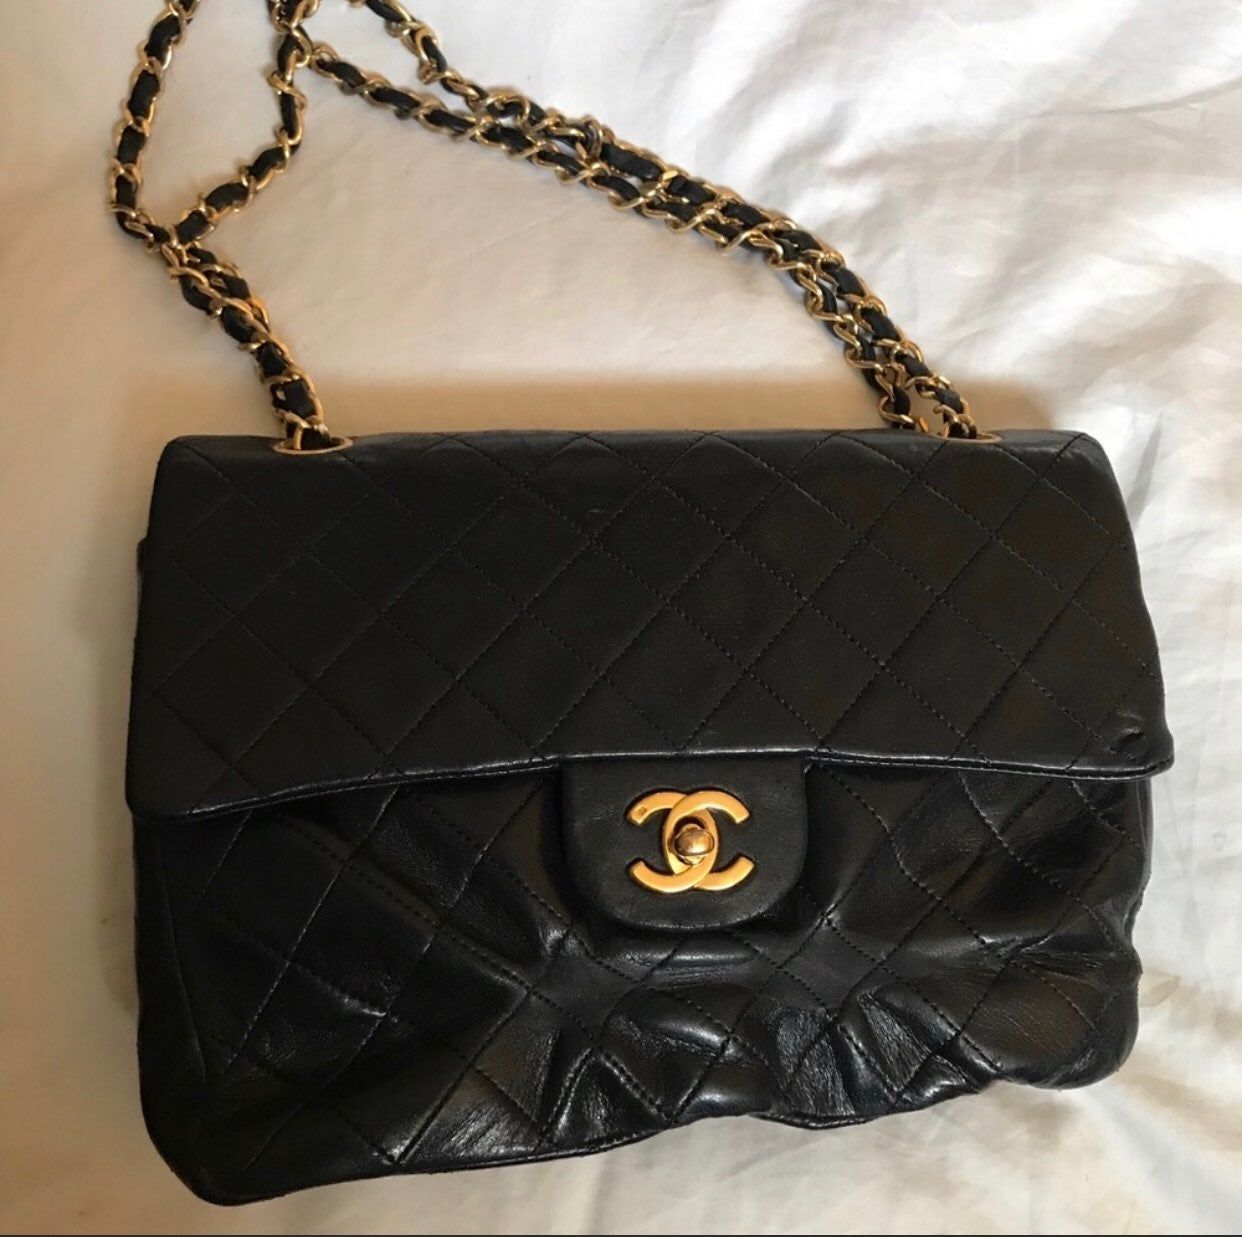 The preowned Chanel is a brand that women love post thumbnail image